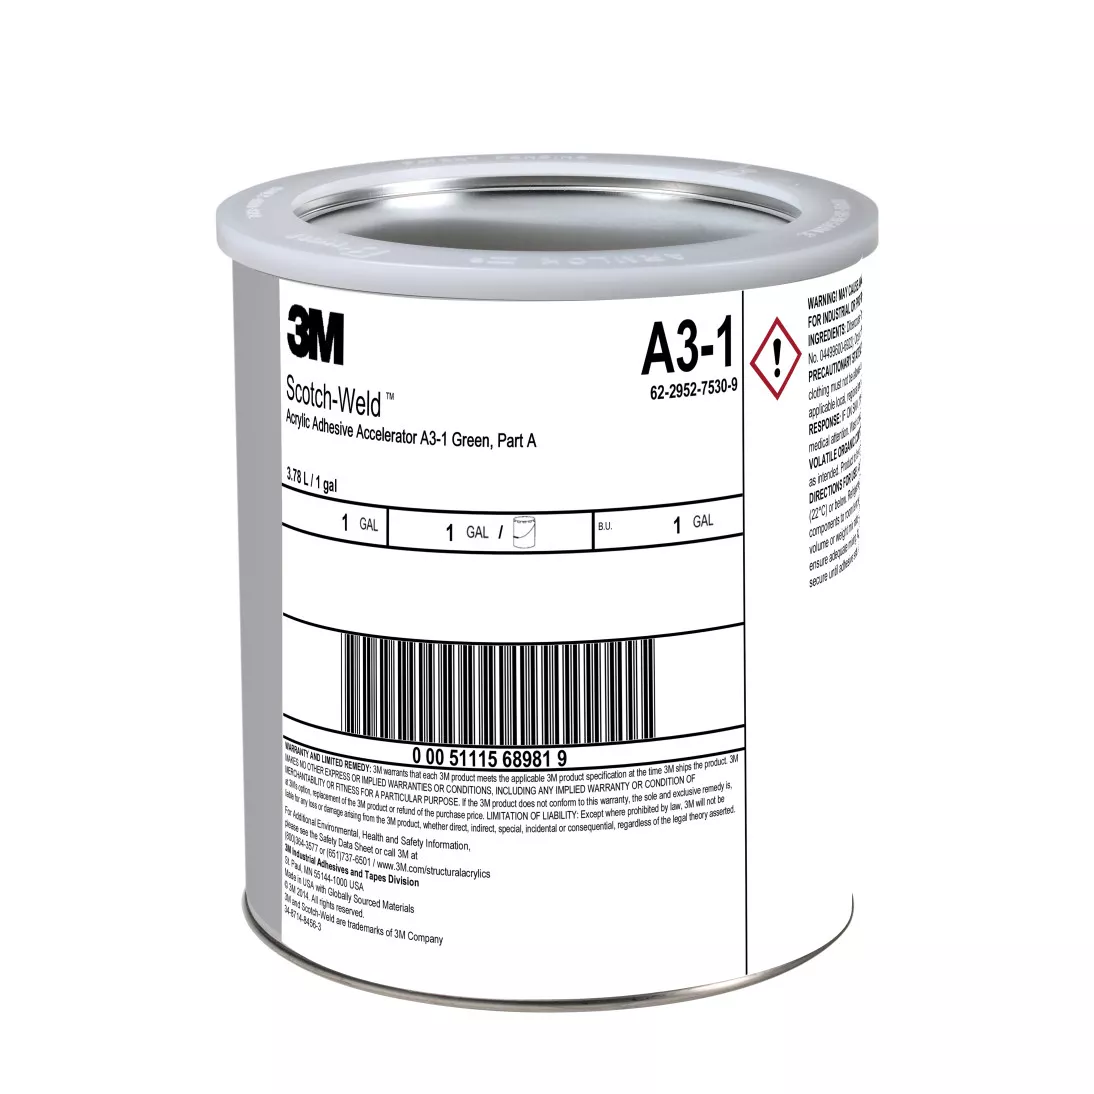 3M™ Scotch-Weld™ Acrylic Adhesive Accelerator A3-1, Green, Part A, 1
Gallon Can, 1/case